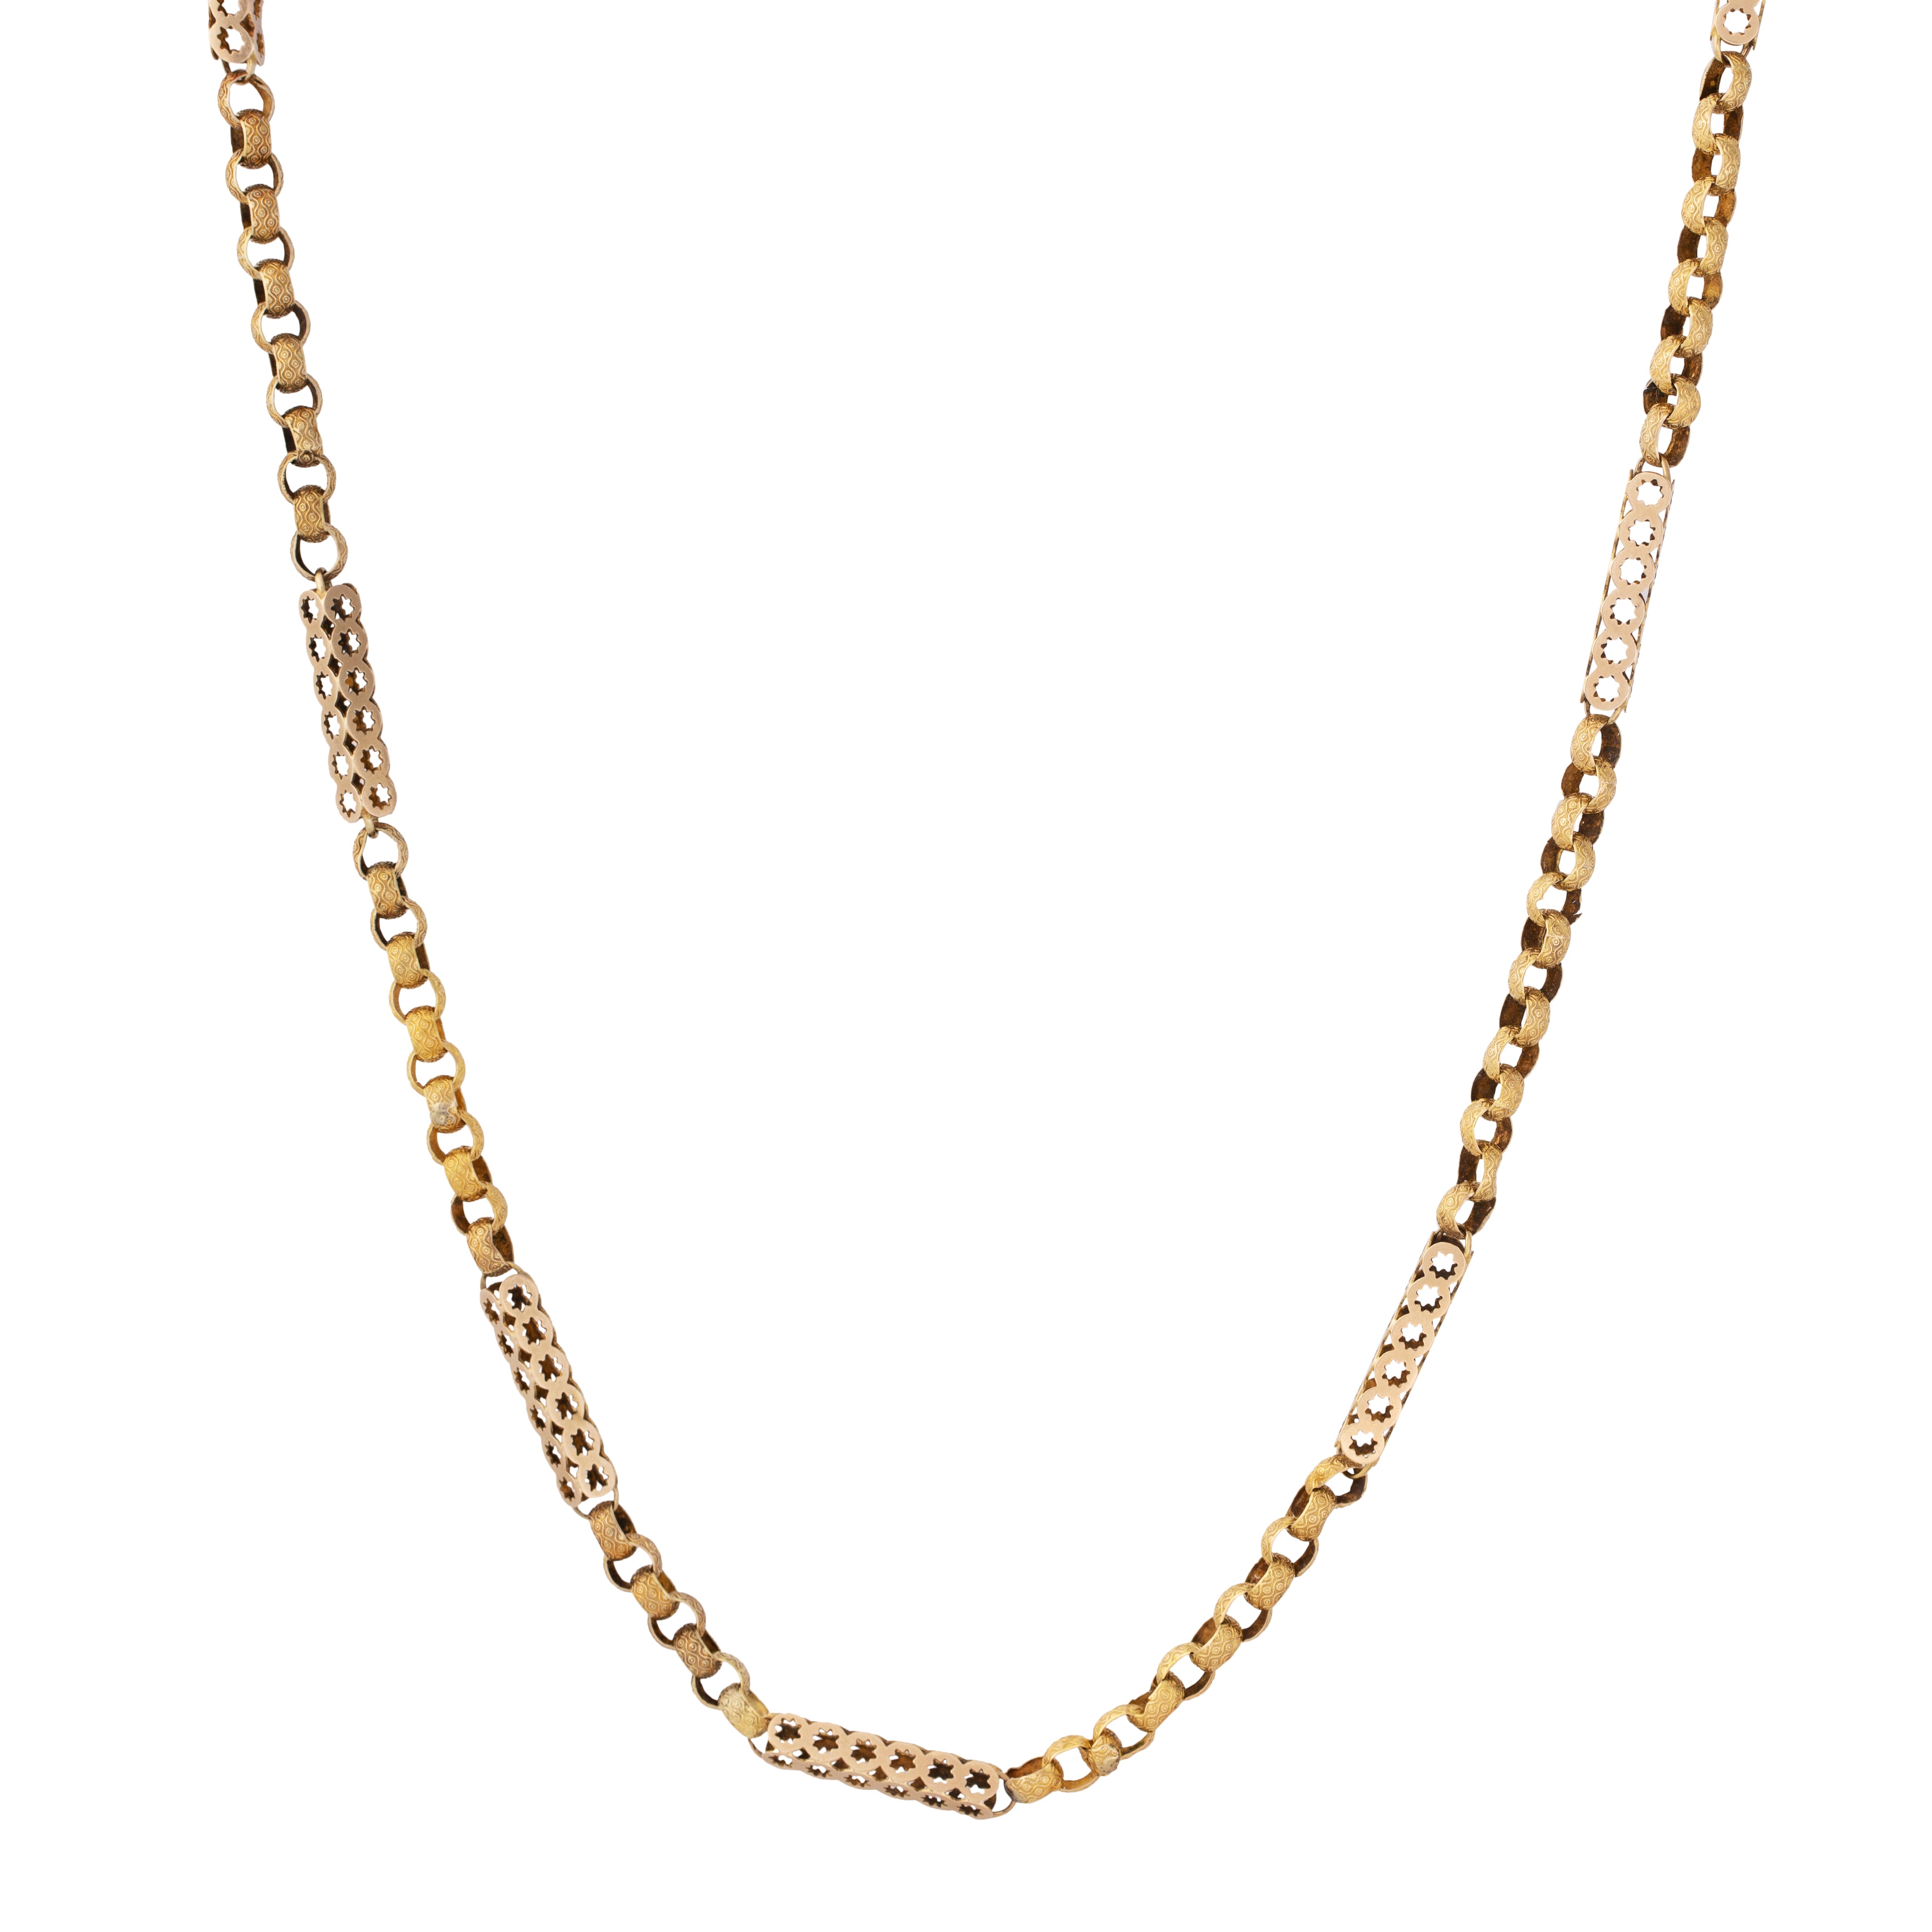 Victorian 15k Gold Chain Necklace With Hand Clasp